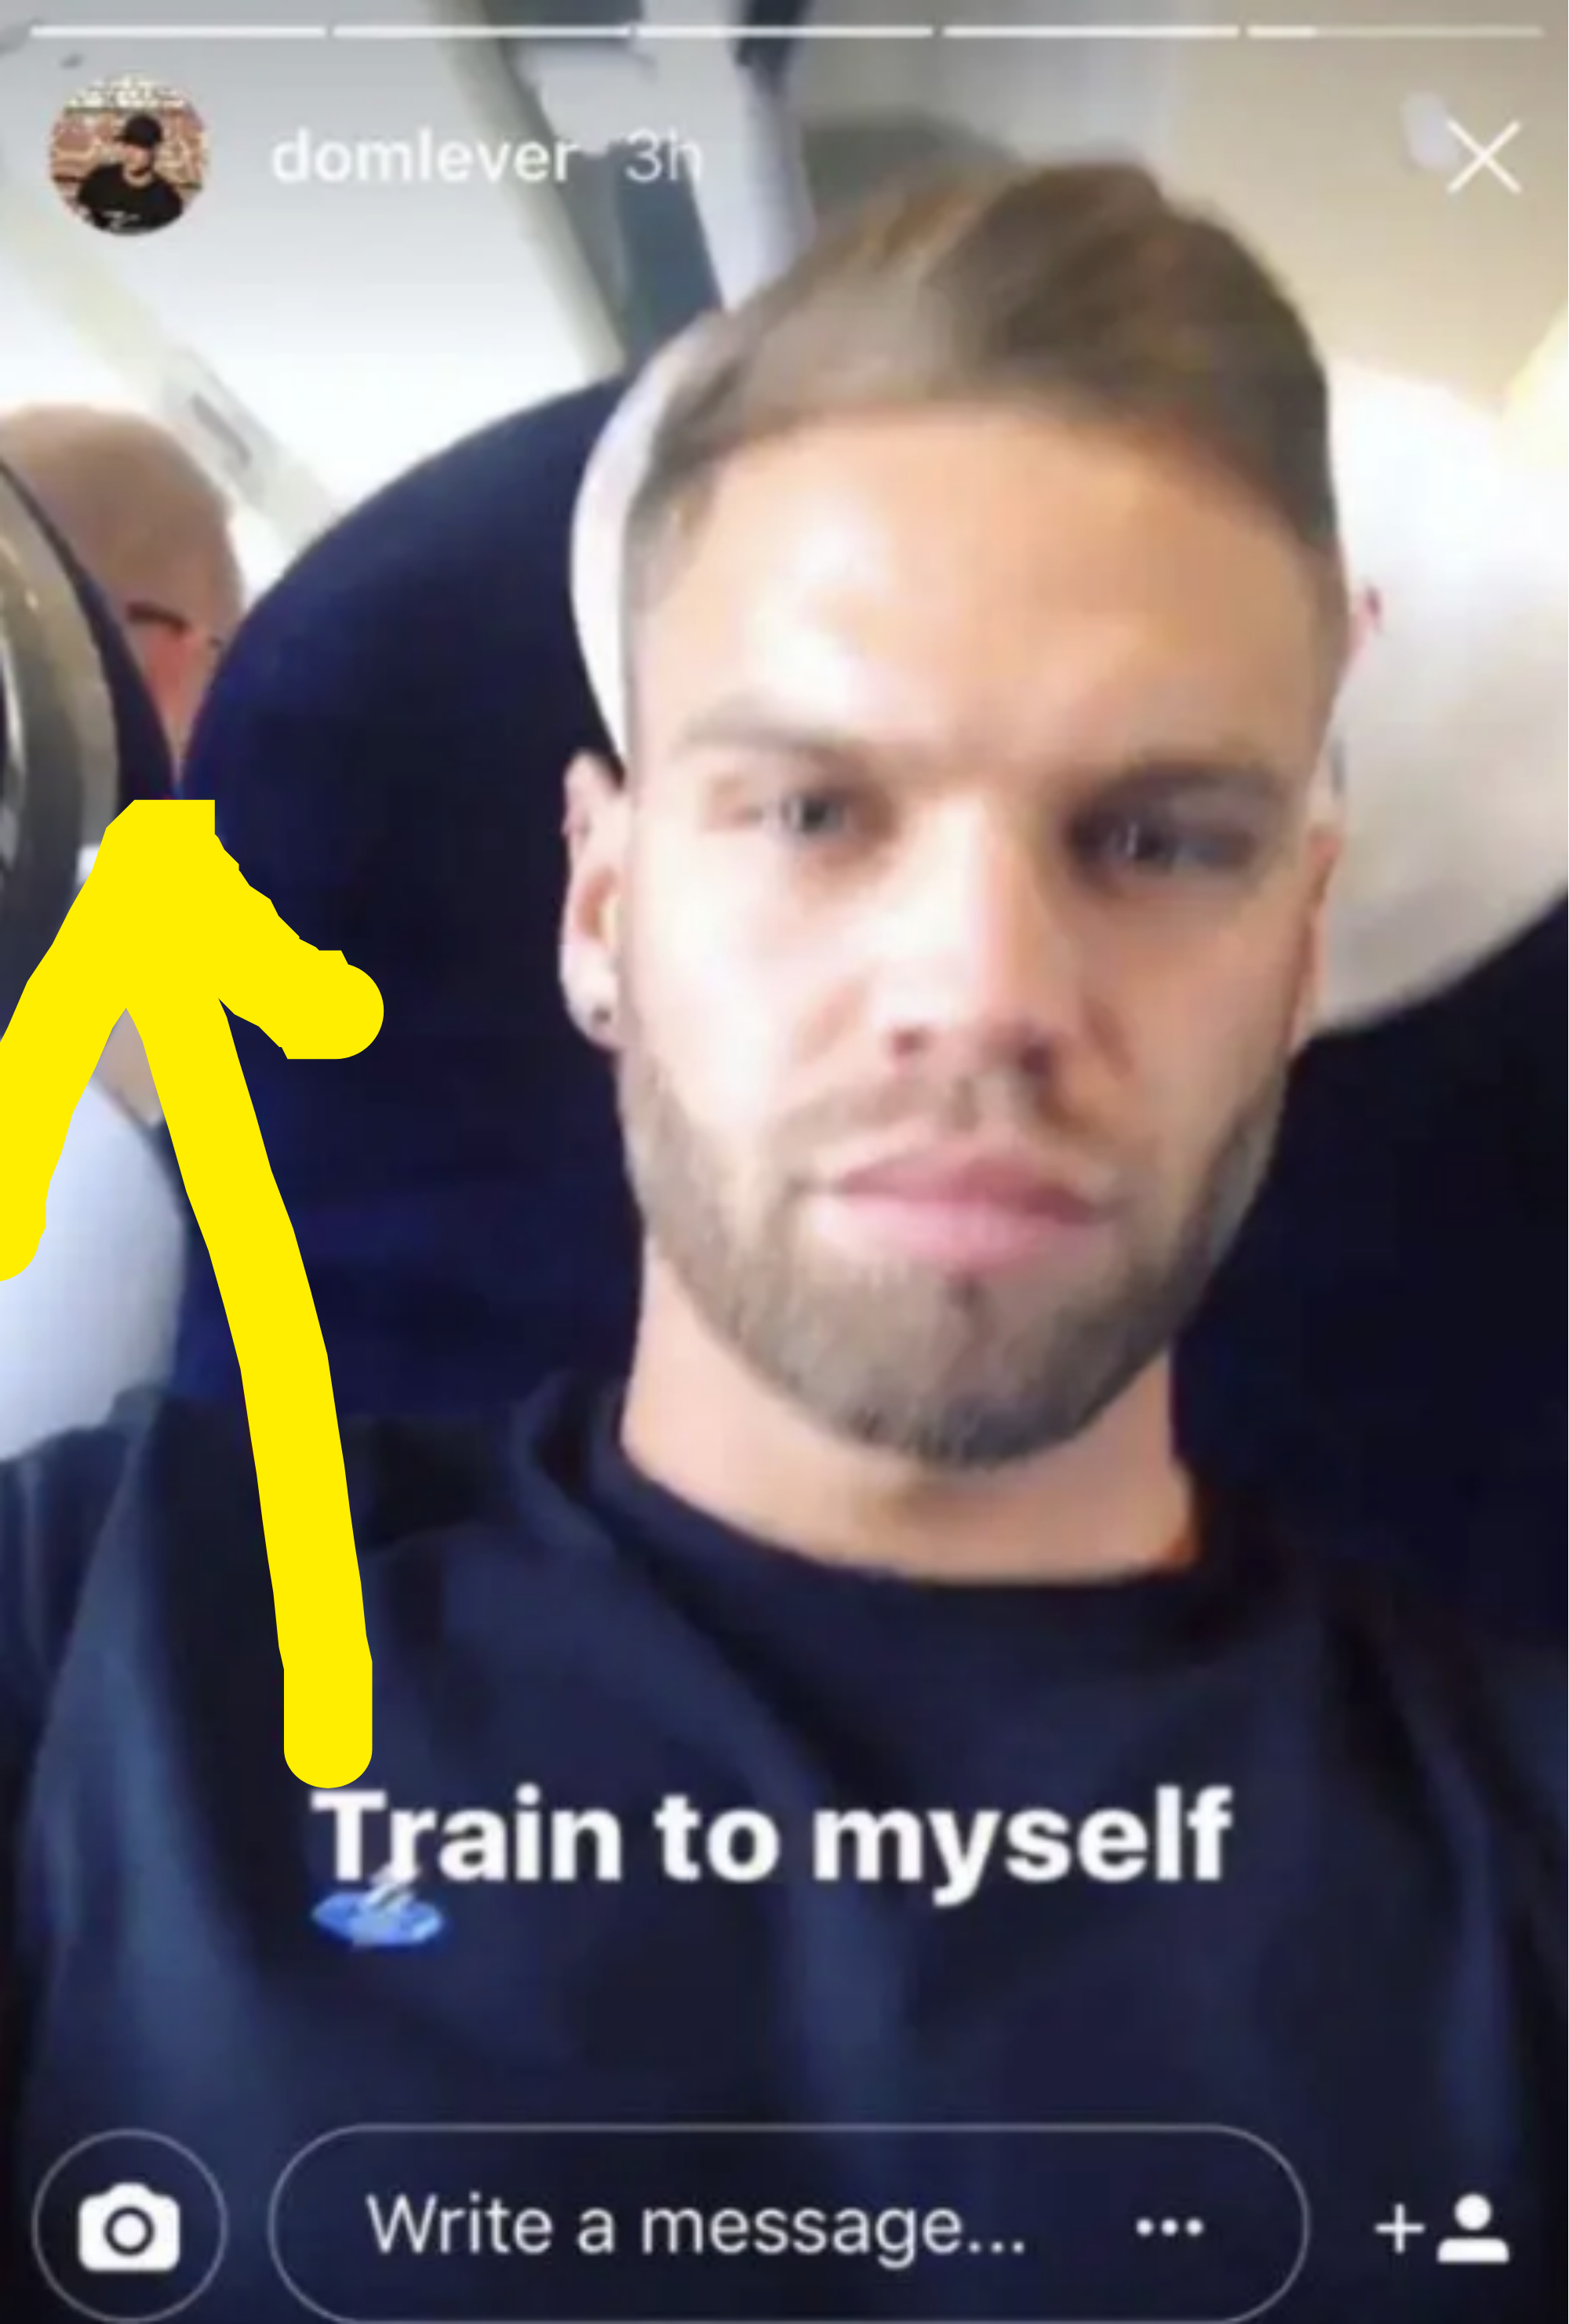 Dom taking a selfie on an empty train with text overlay &quot;Train to myself&quot;